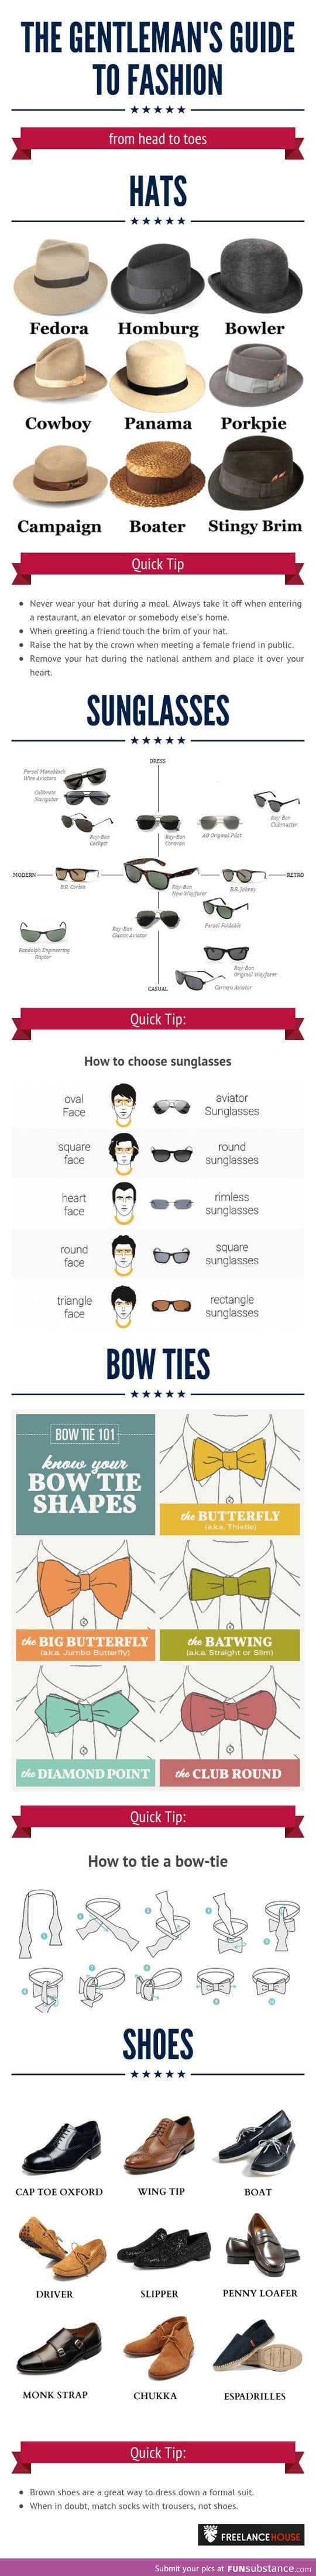 The Gentleman’s Guide To Fashion